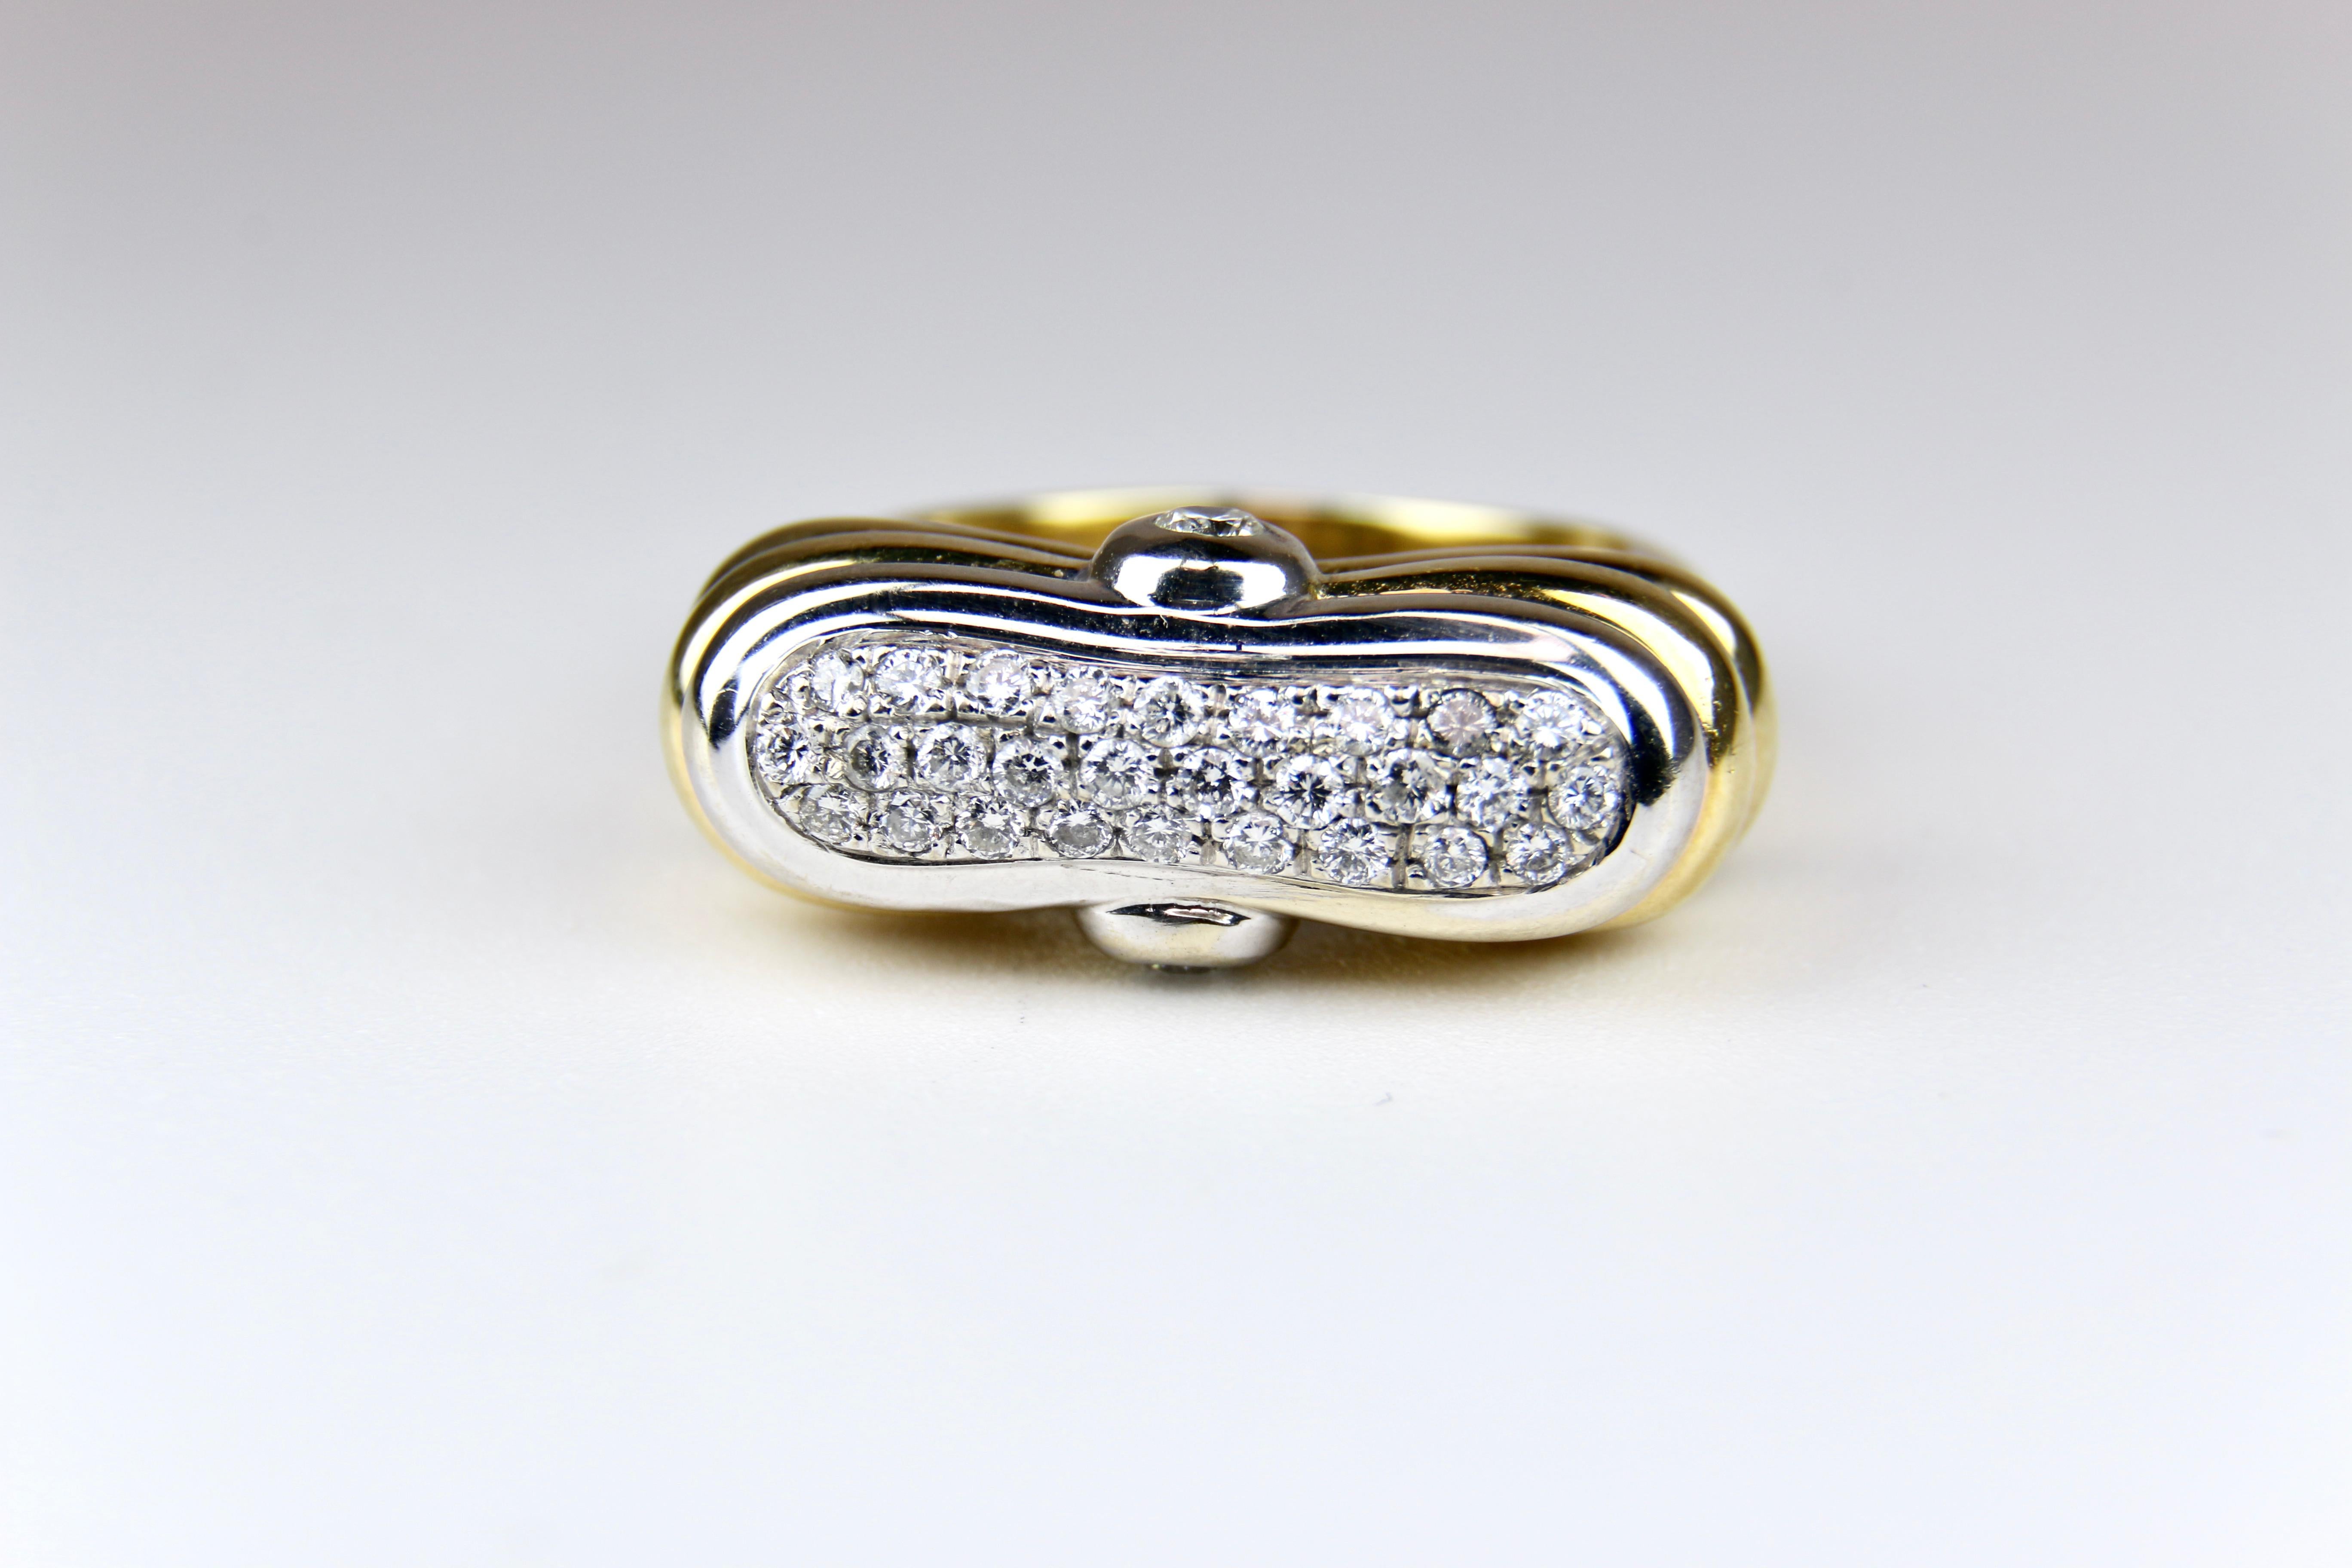 18K Yellow Gold Ribbed Diamond Ring Size 8.25 with Diamond Accent on each side set in yellow gold.  